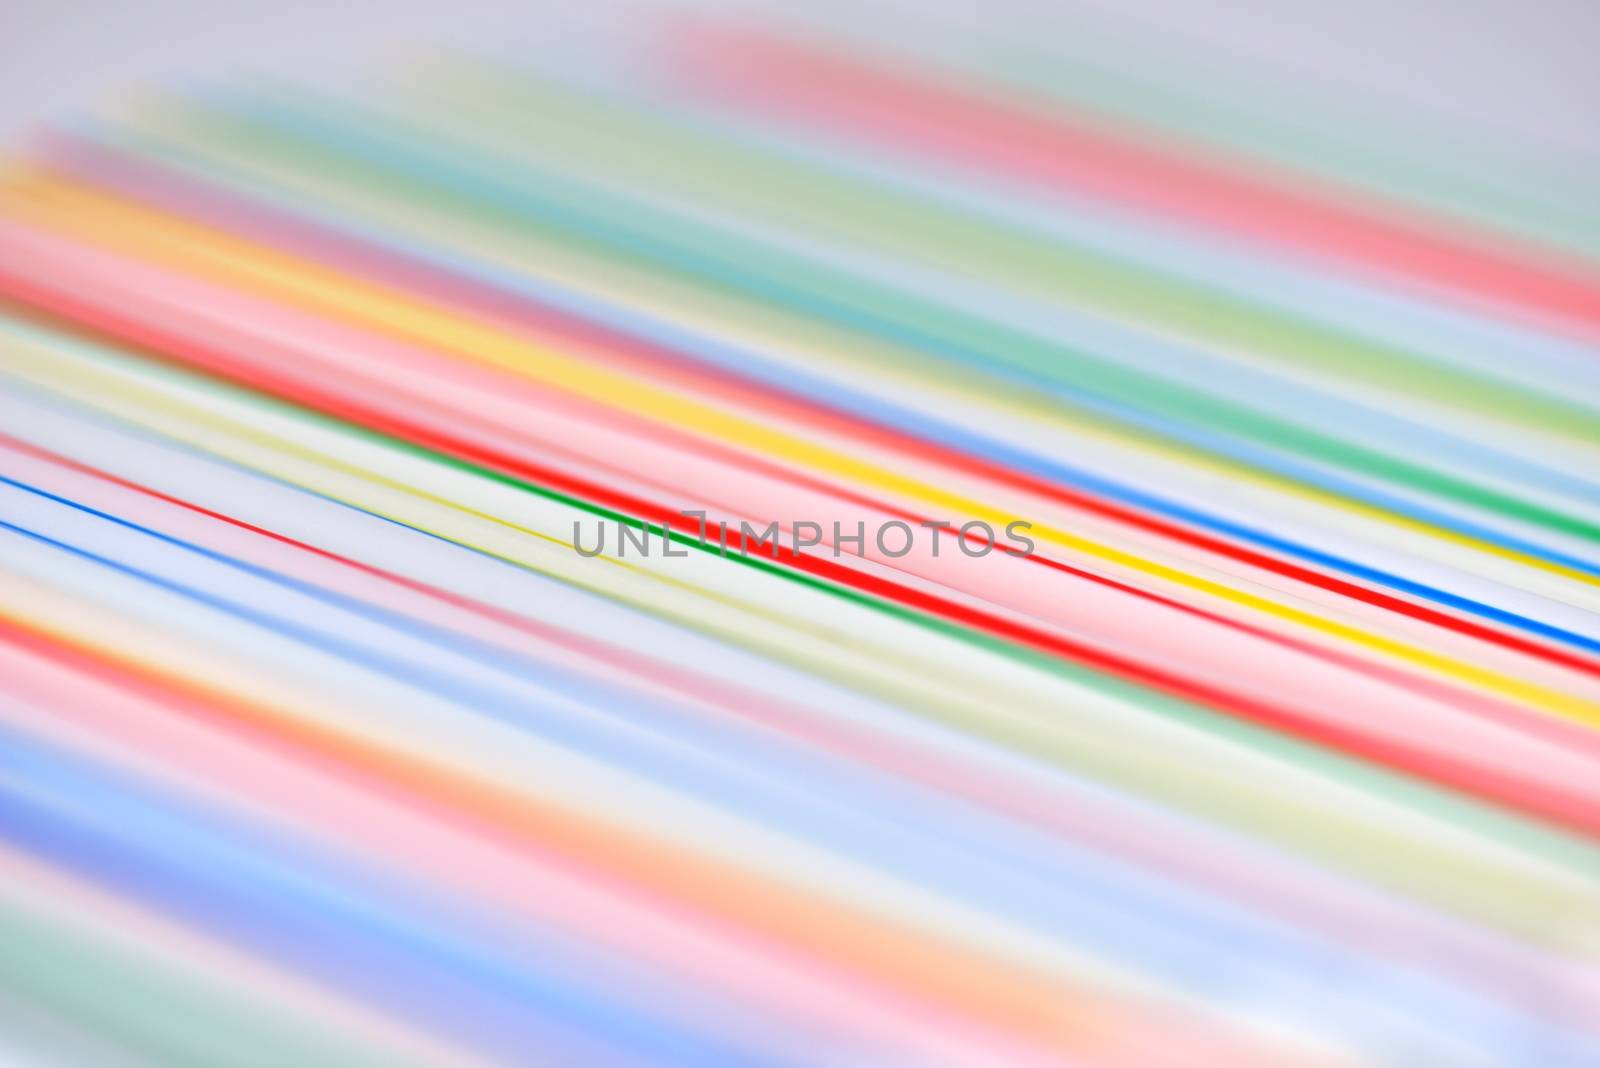 Many colorful drinking straws